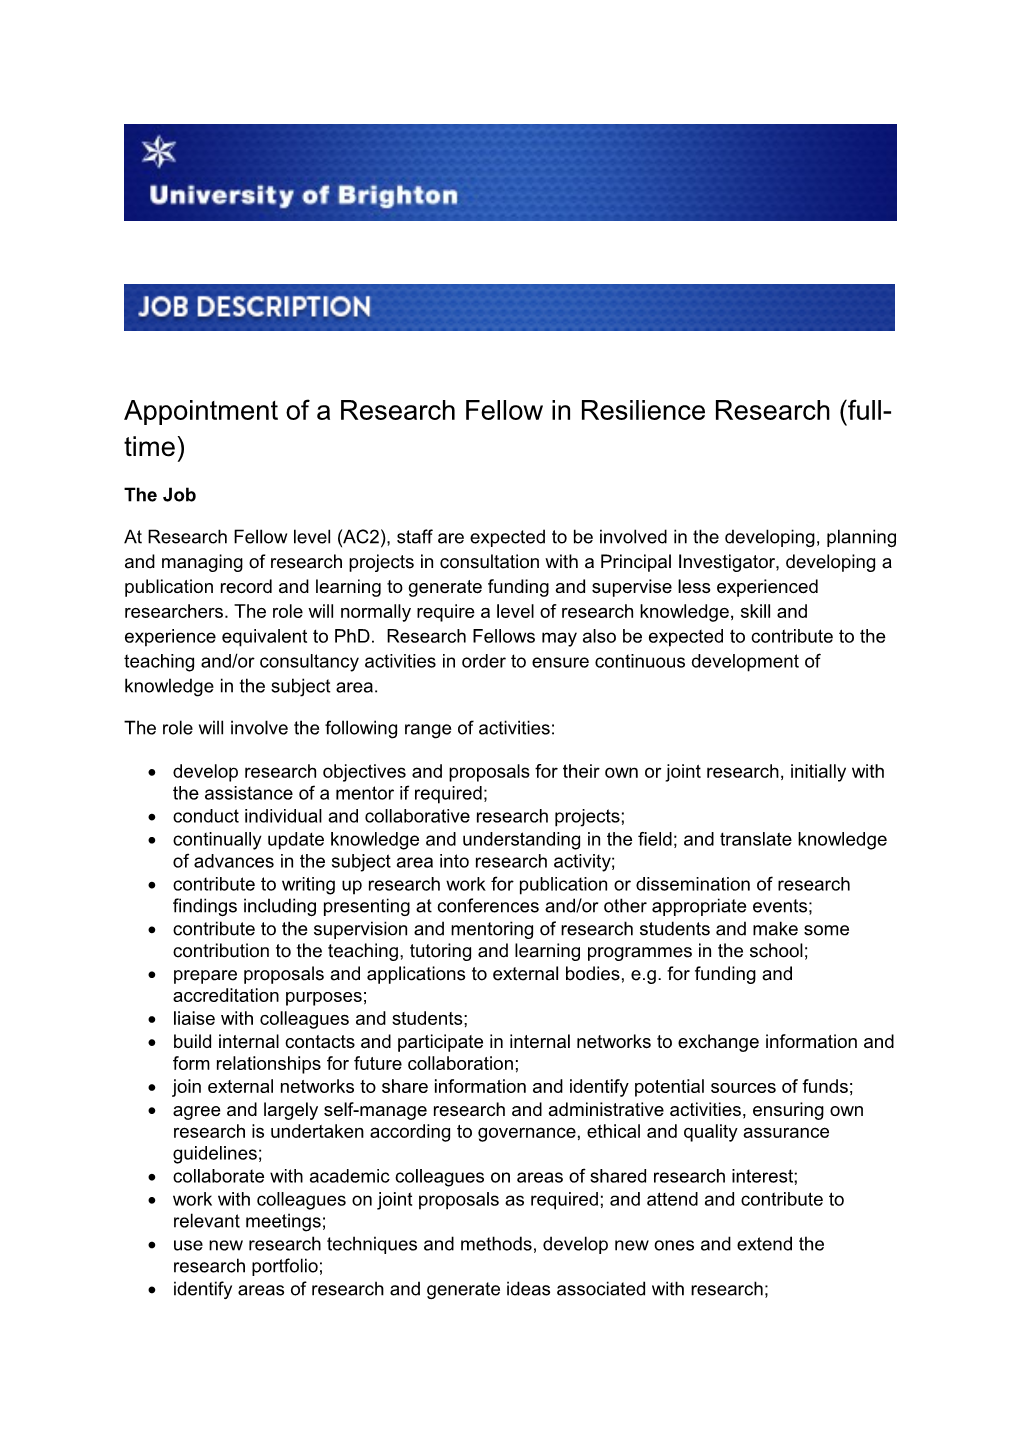 Appointment of a Research Fellow in Resilience Research (Full-Time)